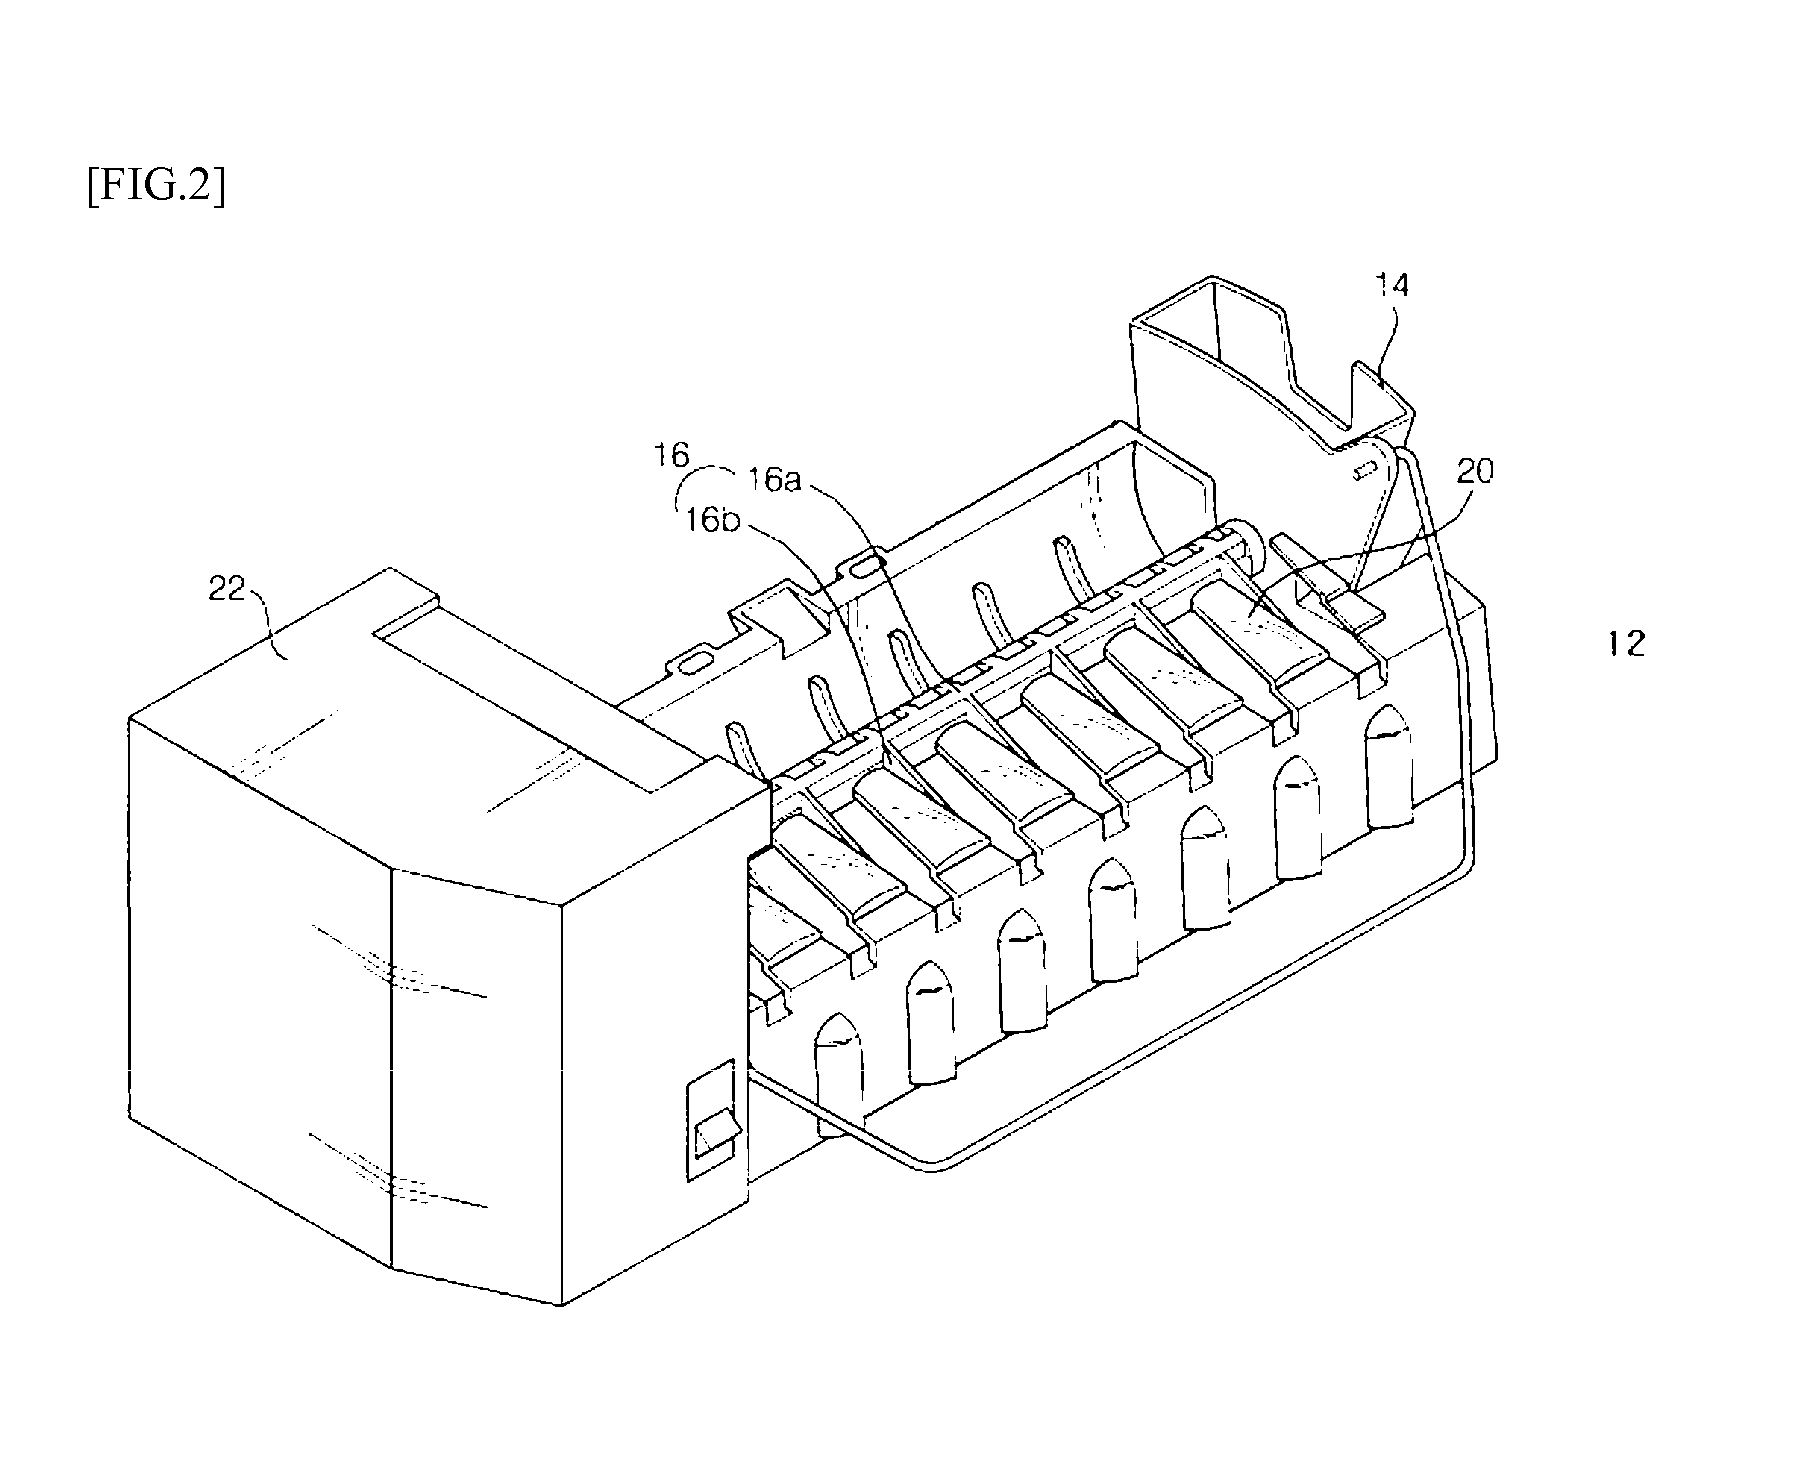 Ice maker for a refrigerator